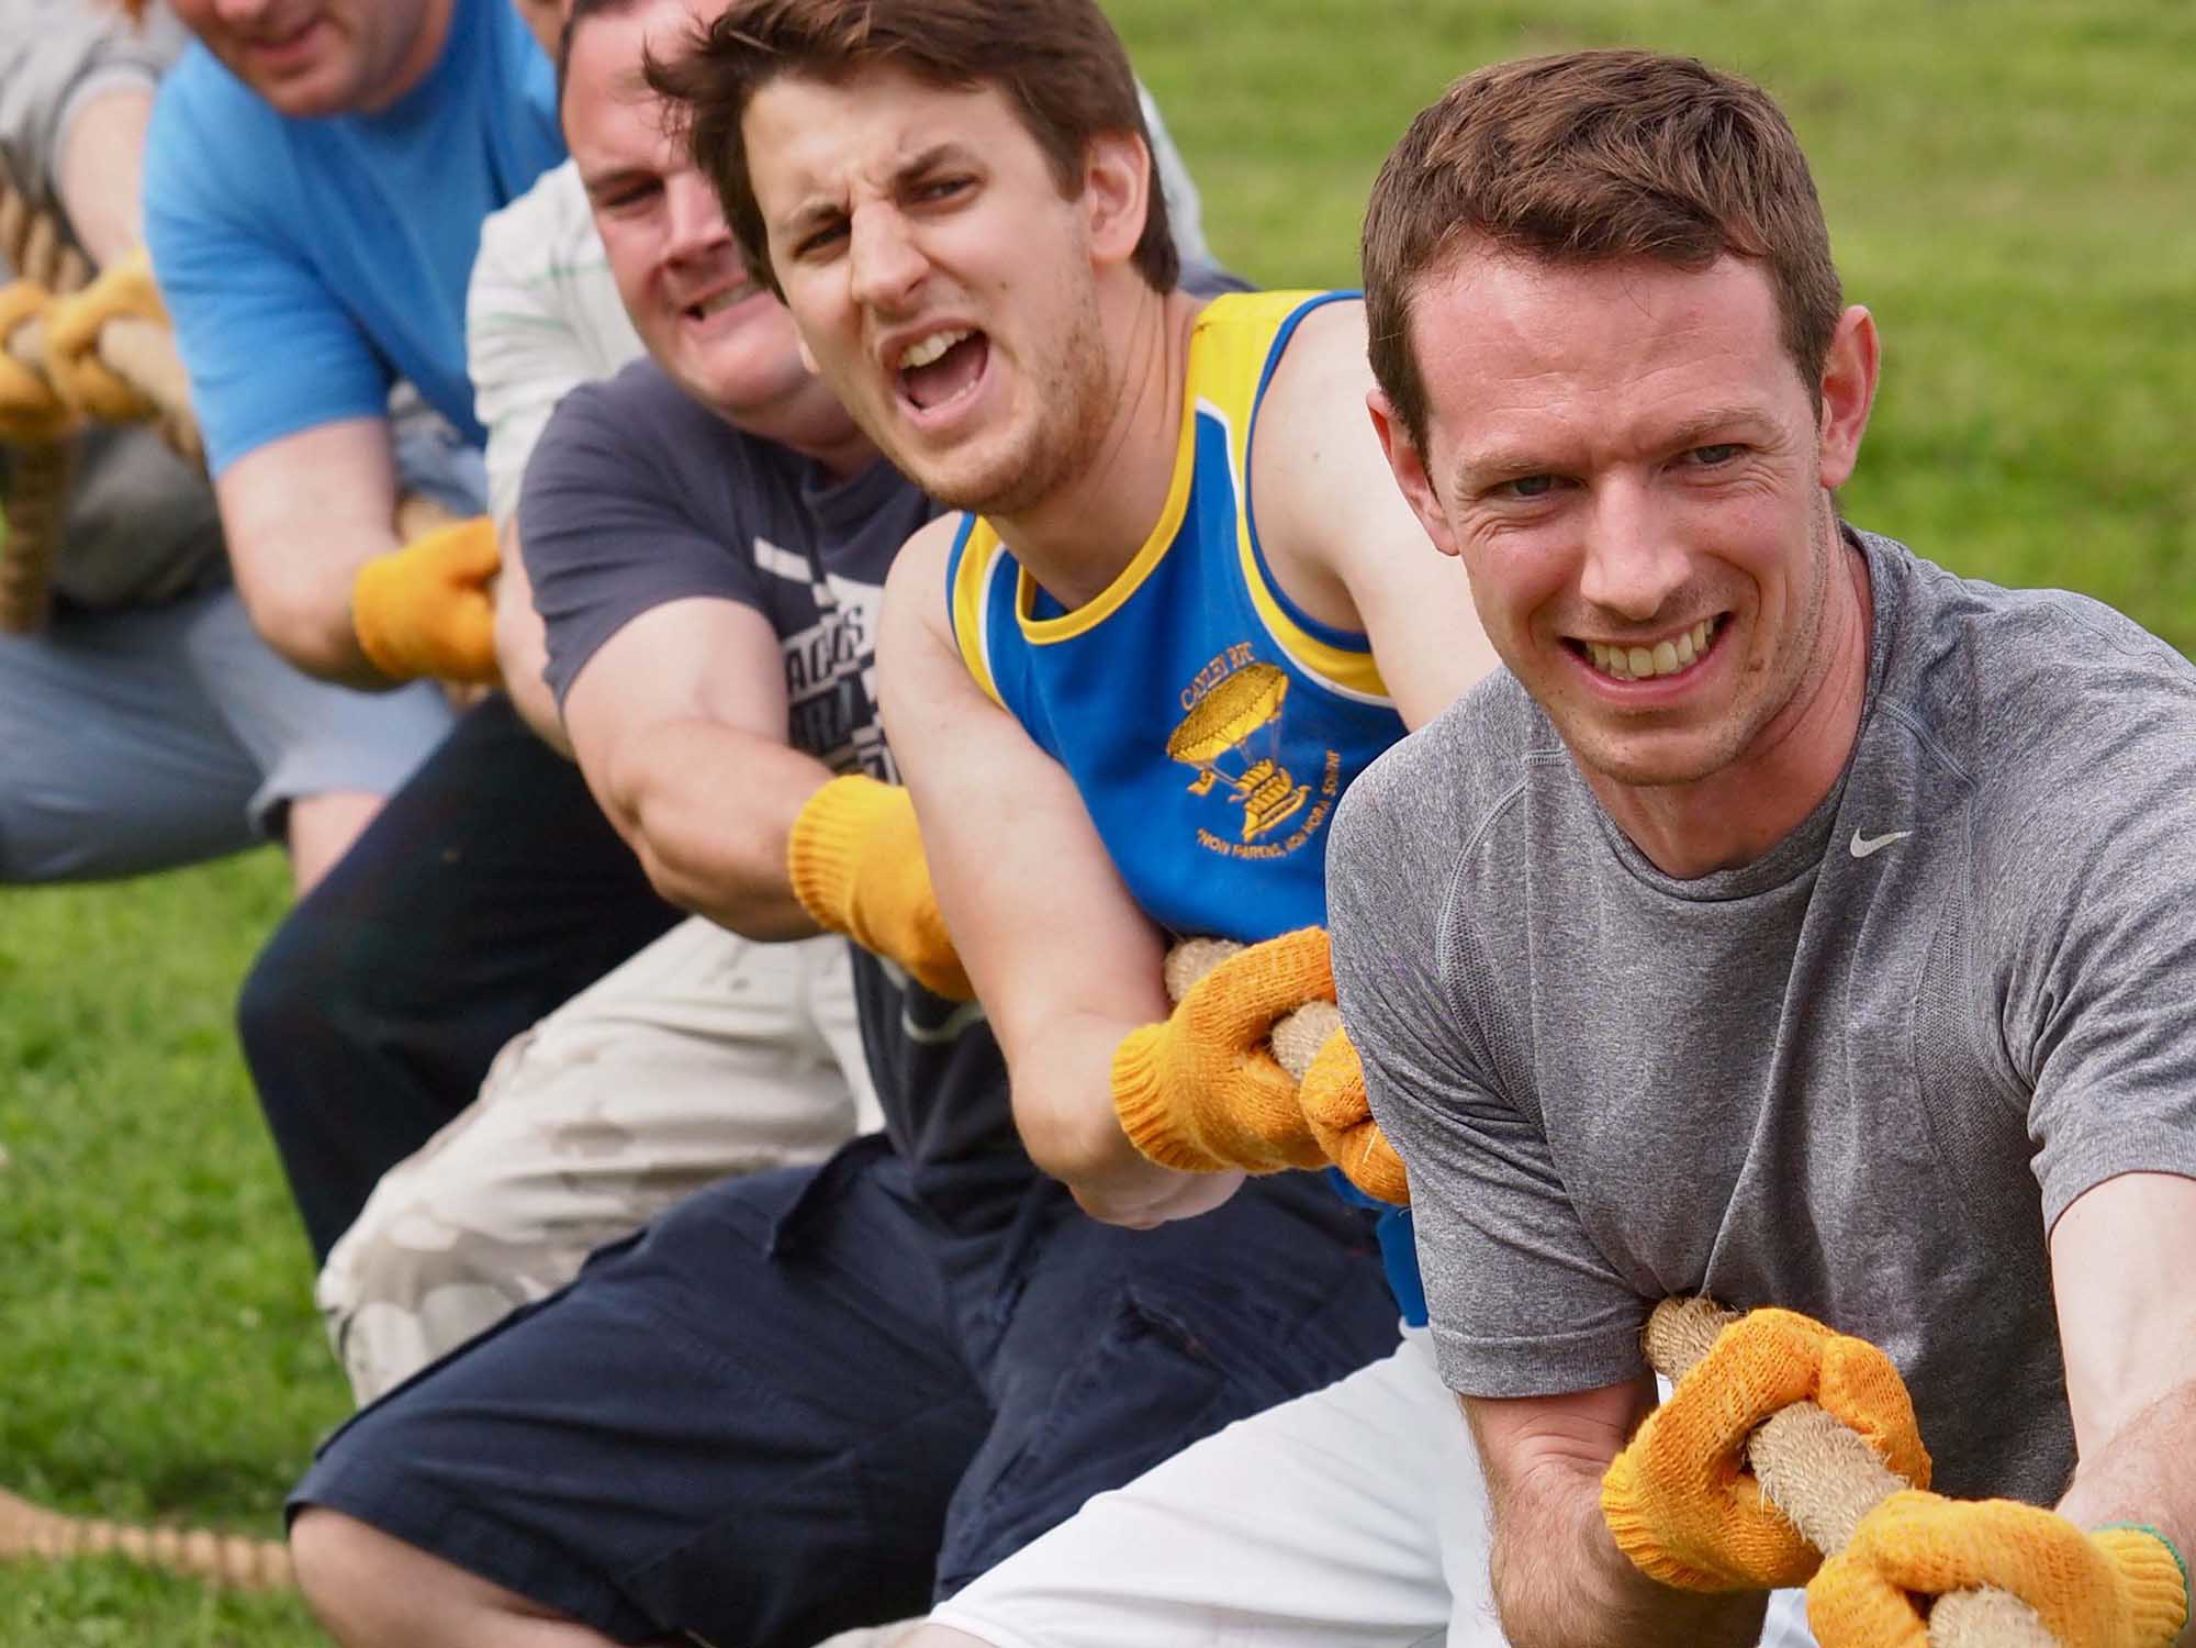 Outdoor Team Building Events in Doncaster